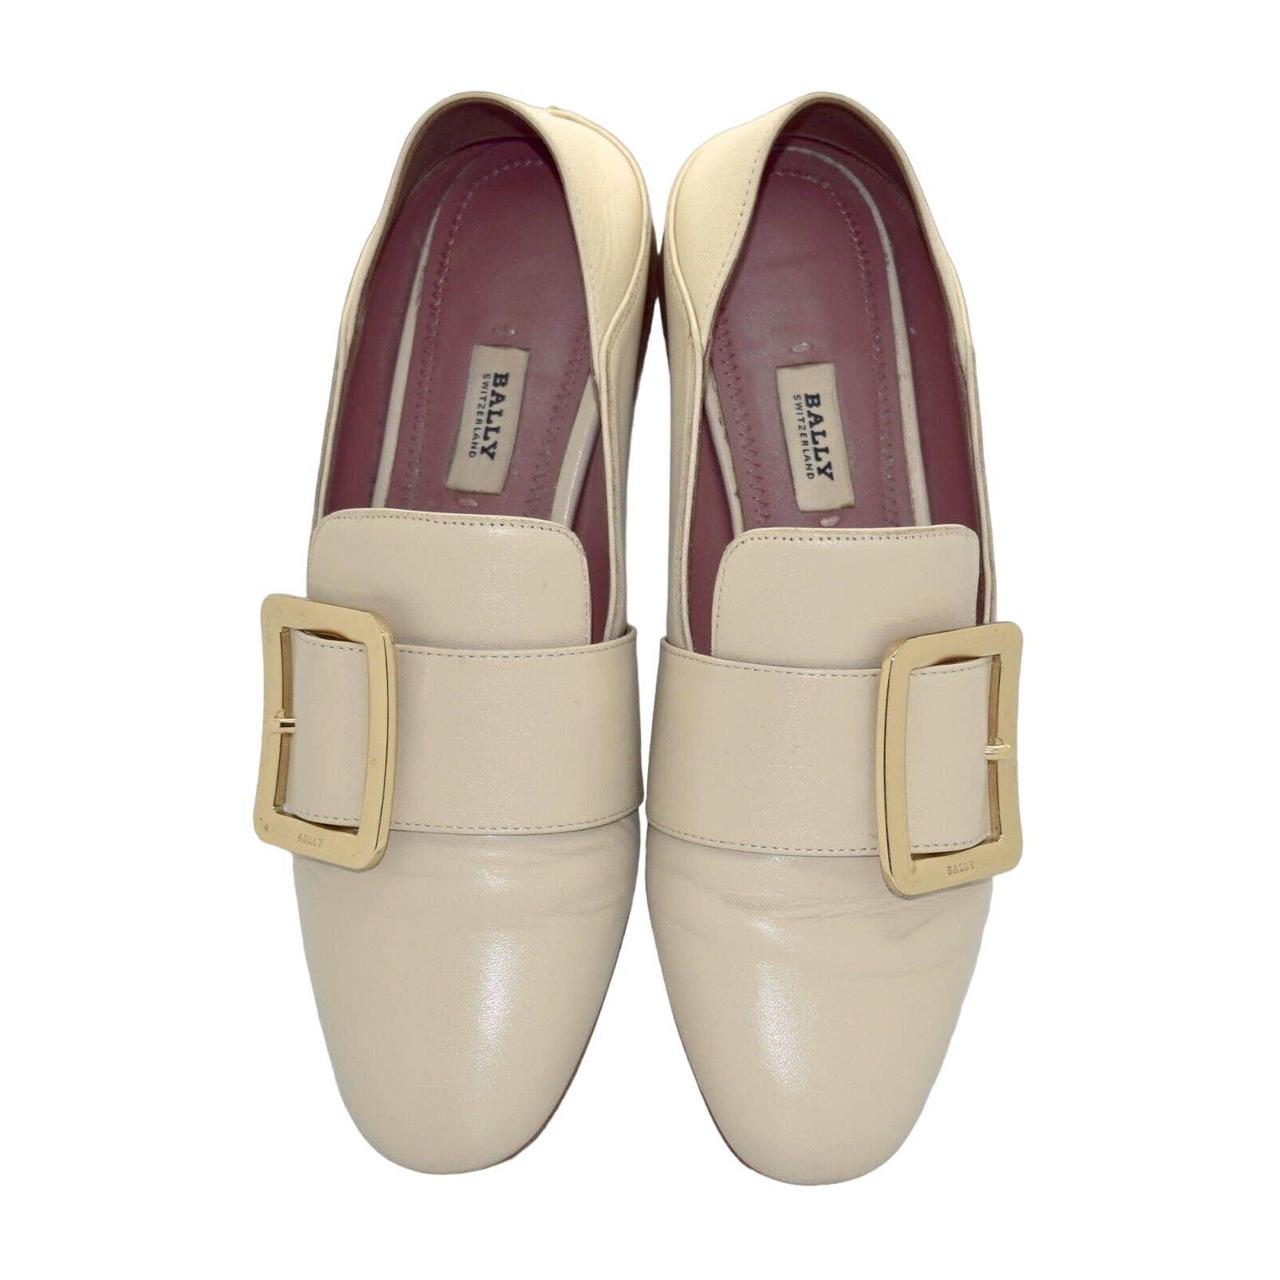 AUTHENTIC BALLY 'Janelle' Bone Leather Gold-tone